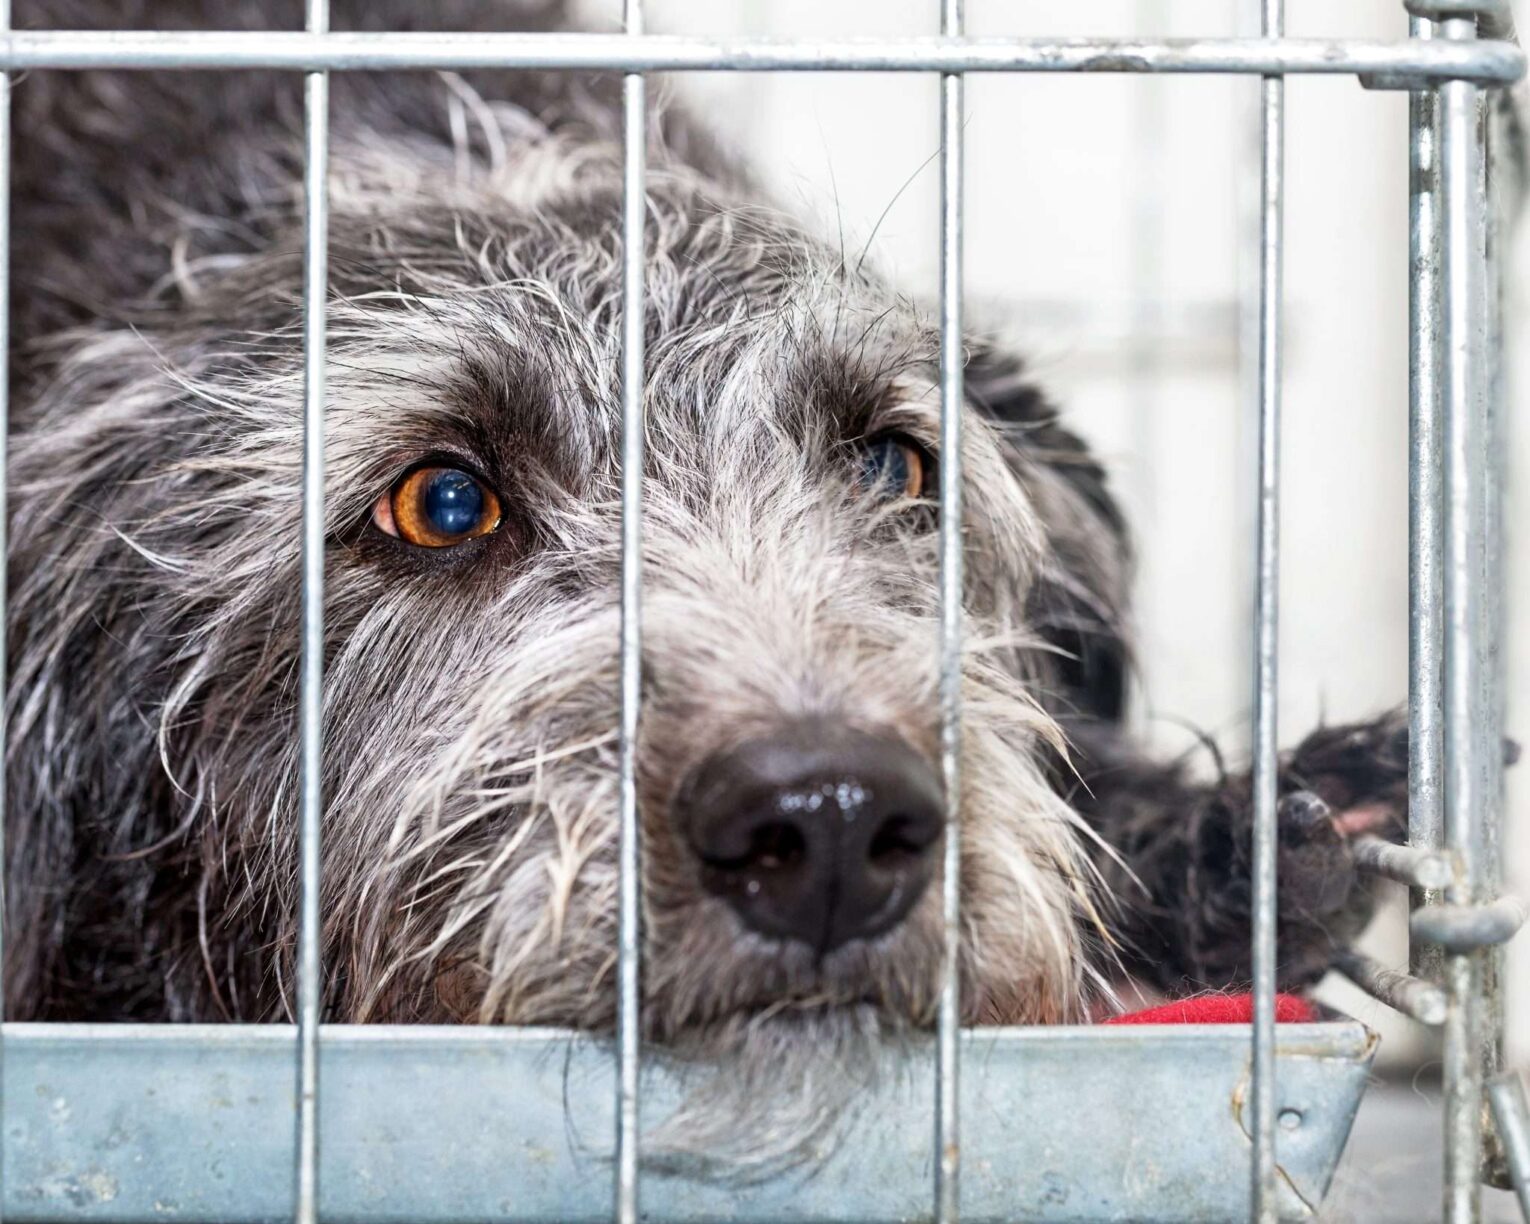 sad rescue dog 2048x1639 1 1530x1224 - Examining the Ethics of Crate Training Puppies: Is it Cruel or Beneficial?"